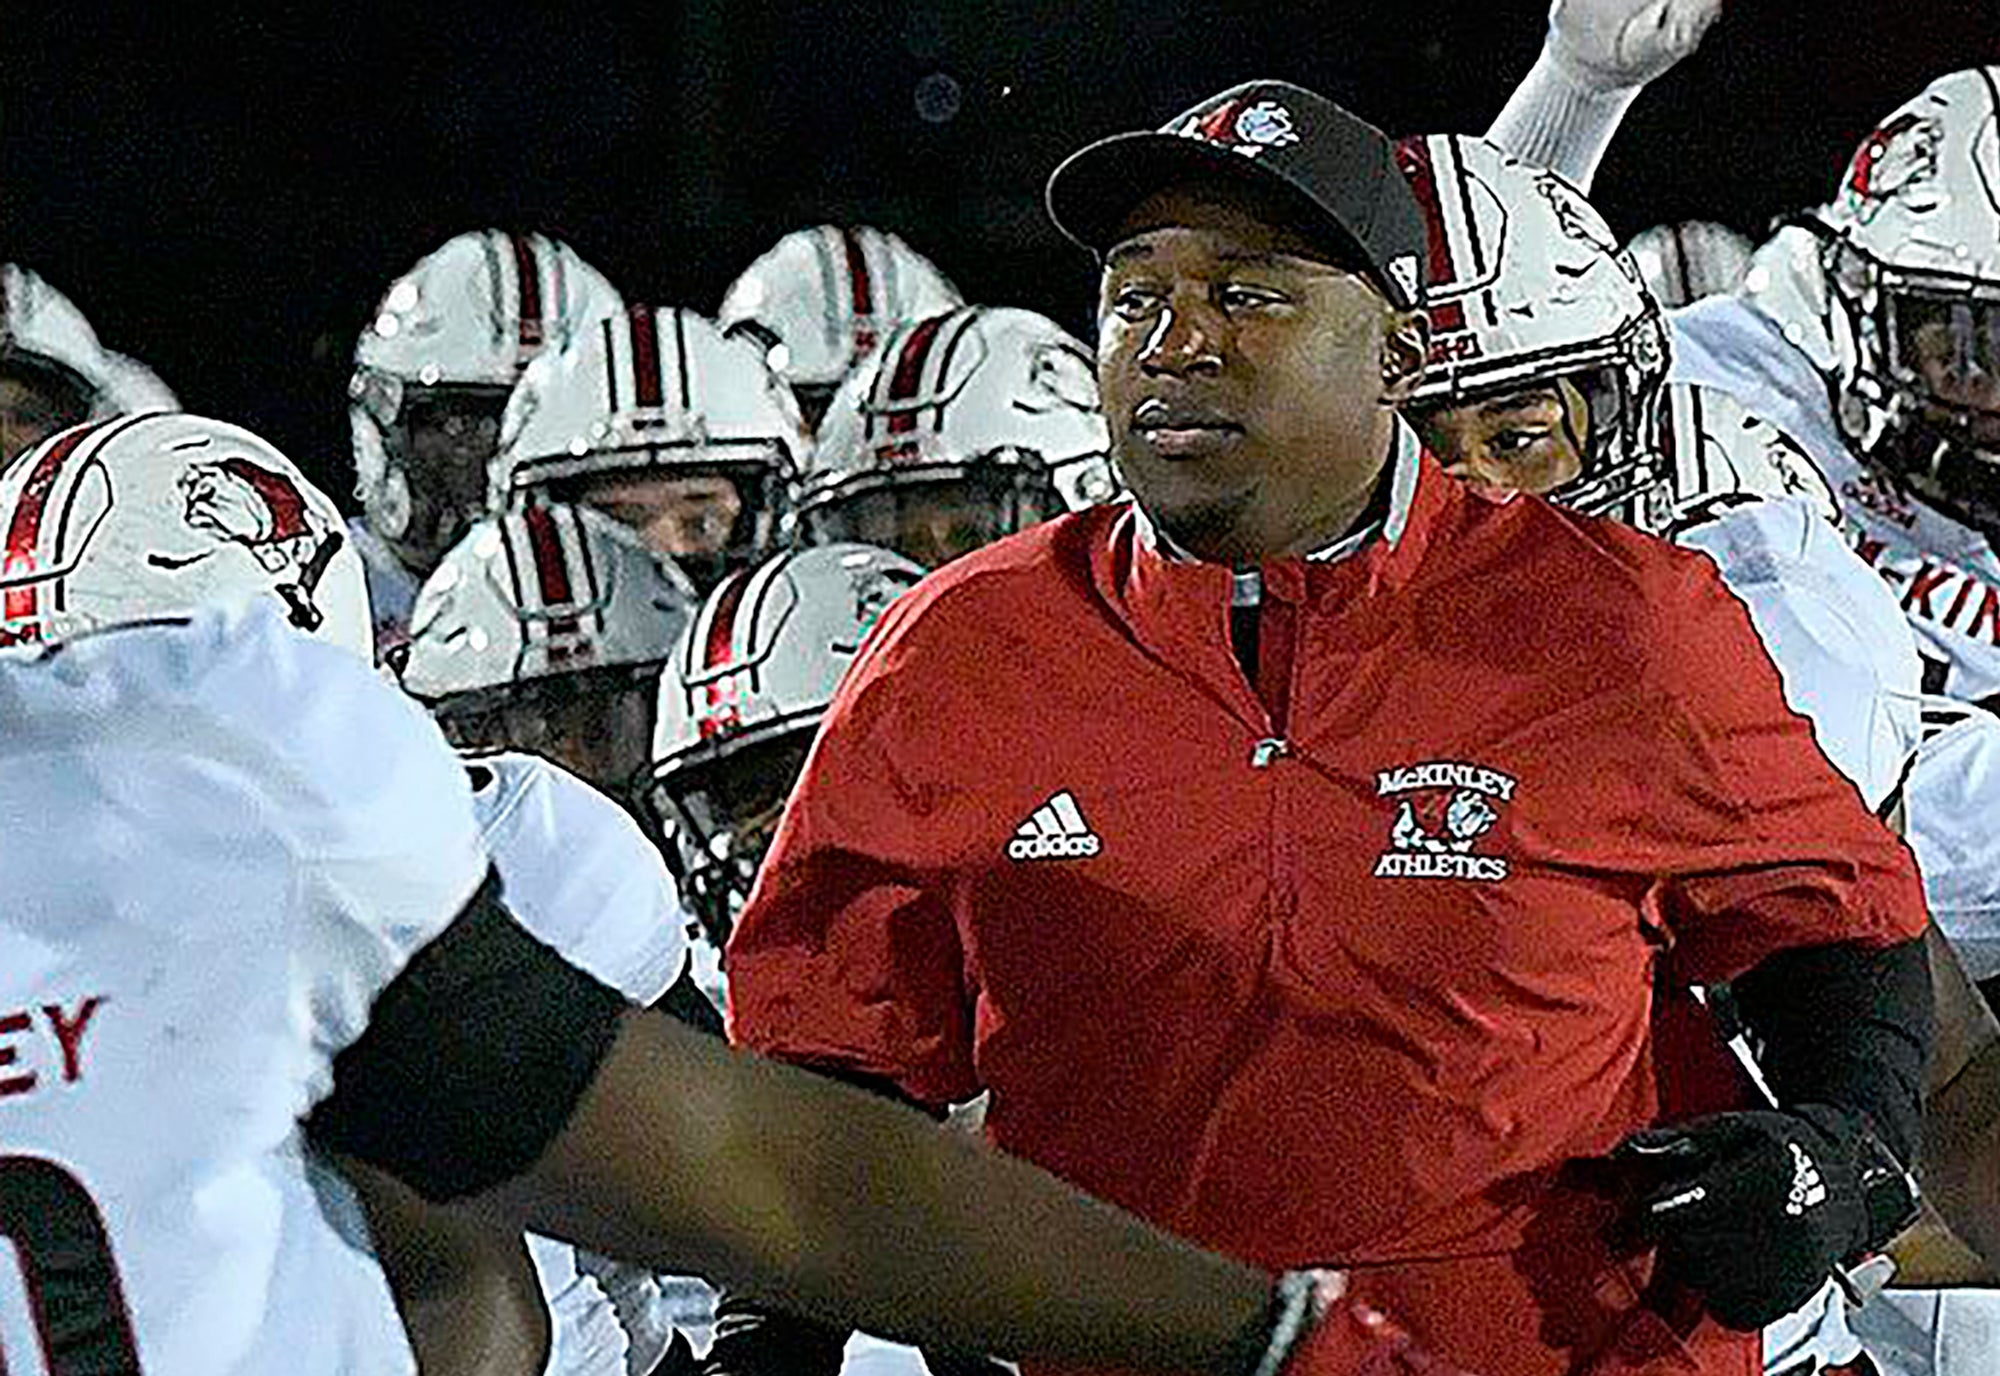 Canton McKinley High School football coach Marcus Wattley. Wattley and seven assistant coaches have been suspended by the Canton City School District after one of the players said coaches forced him to eat pork in violation of his religious beliefs